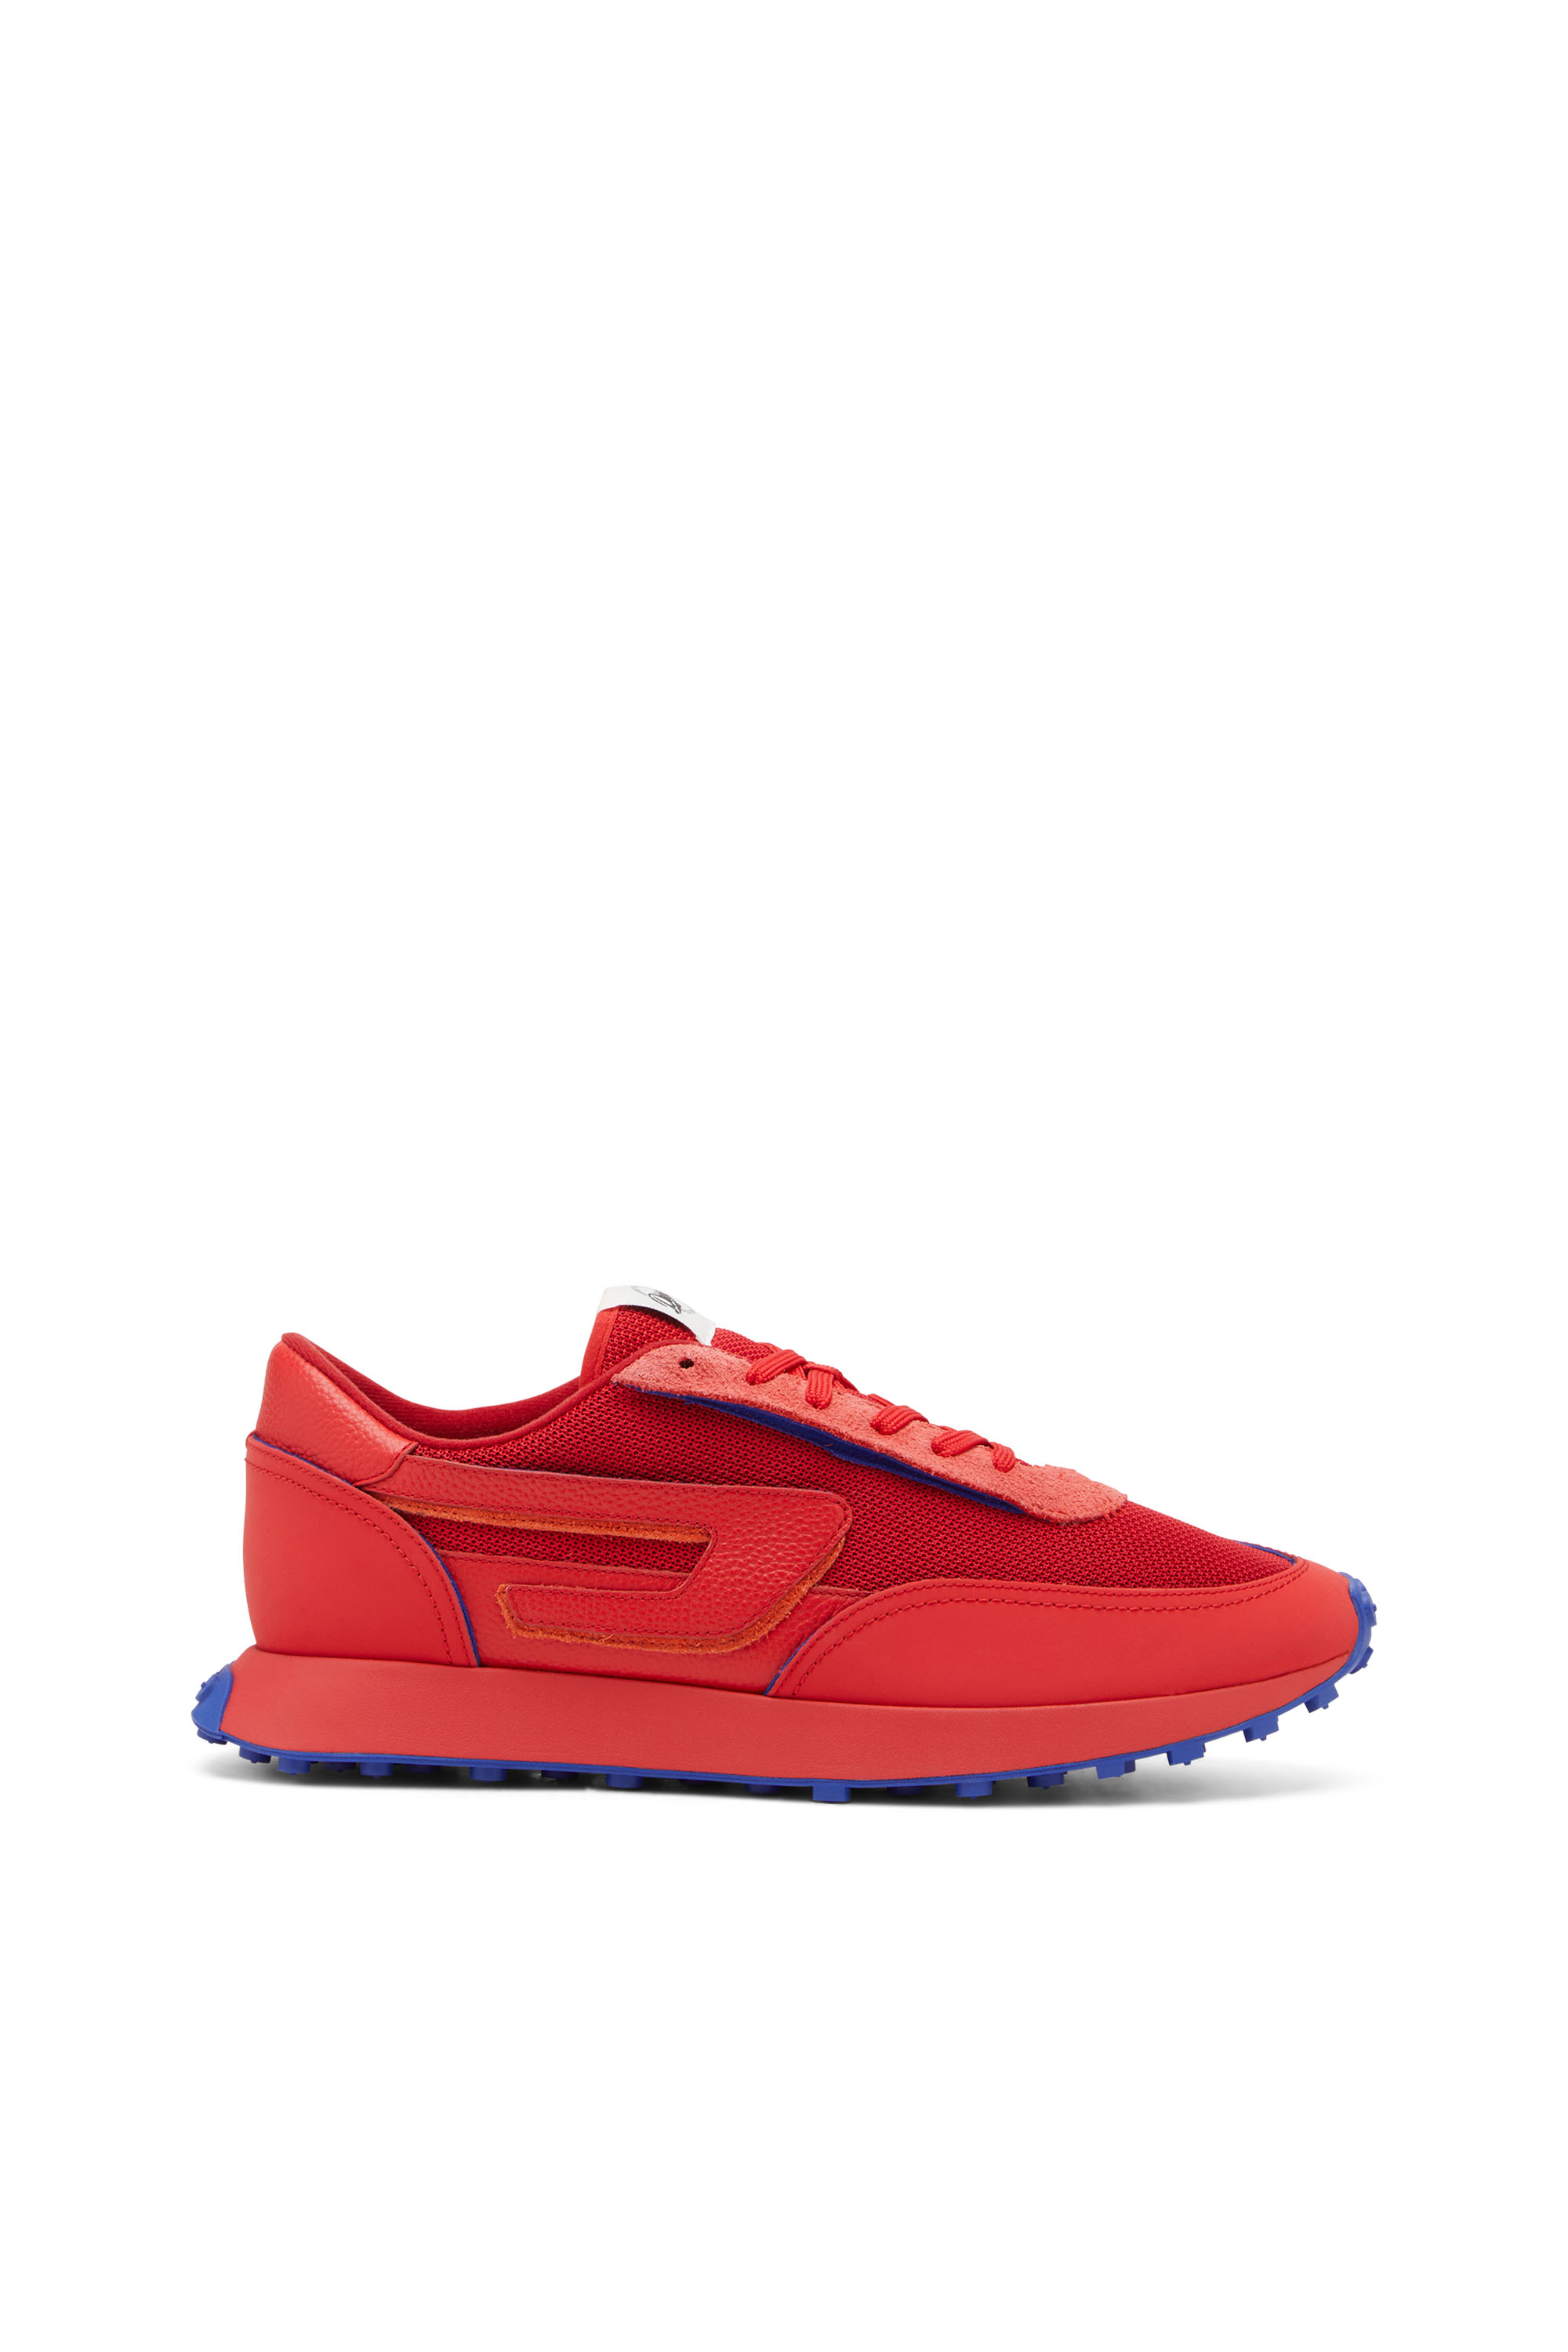 Diesel S-racer Lc In Red